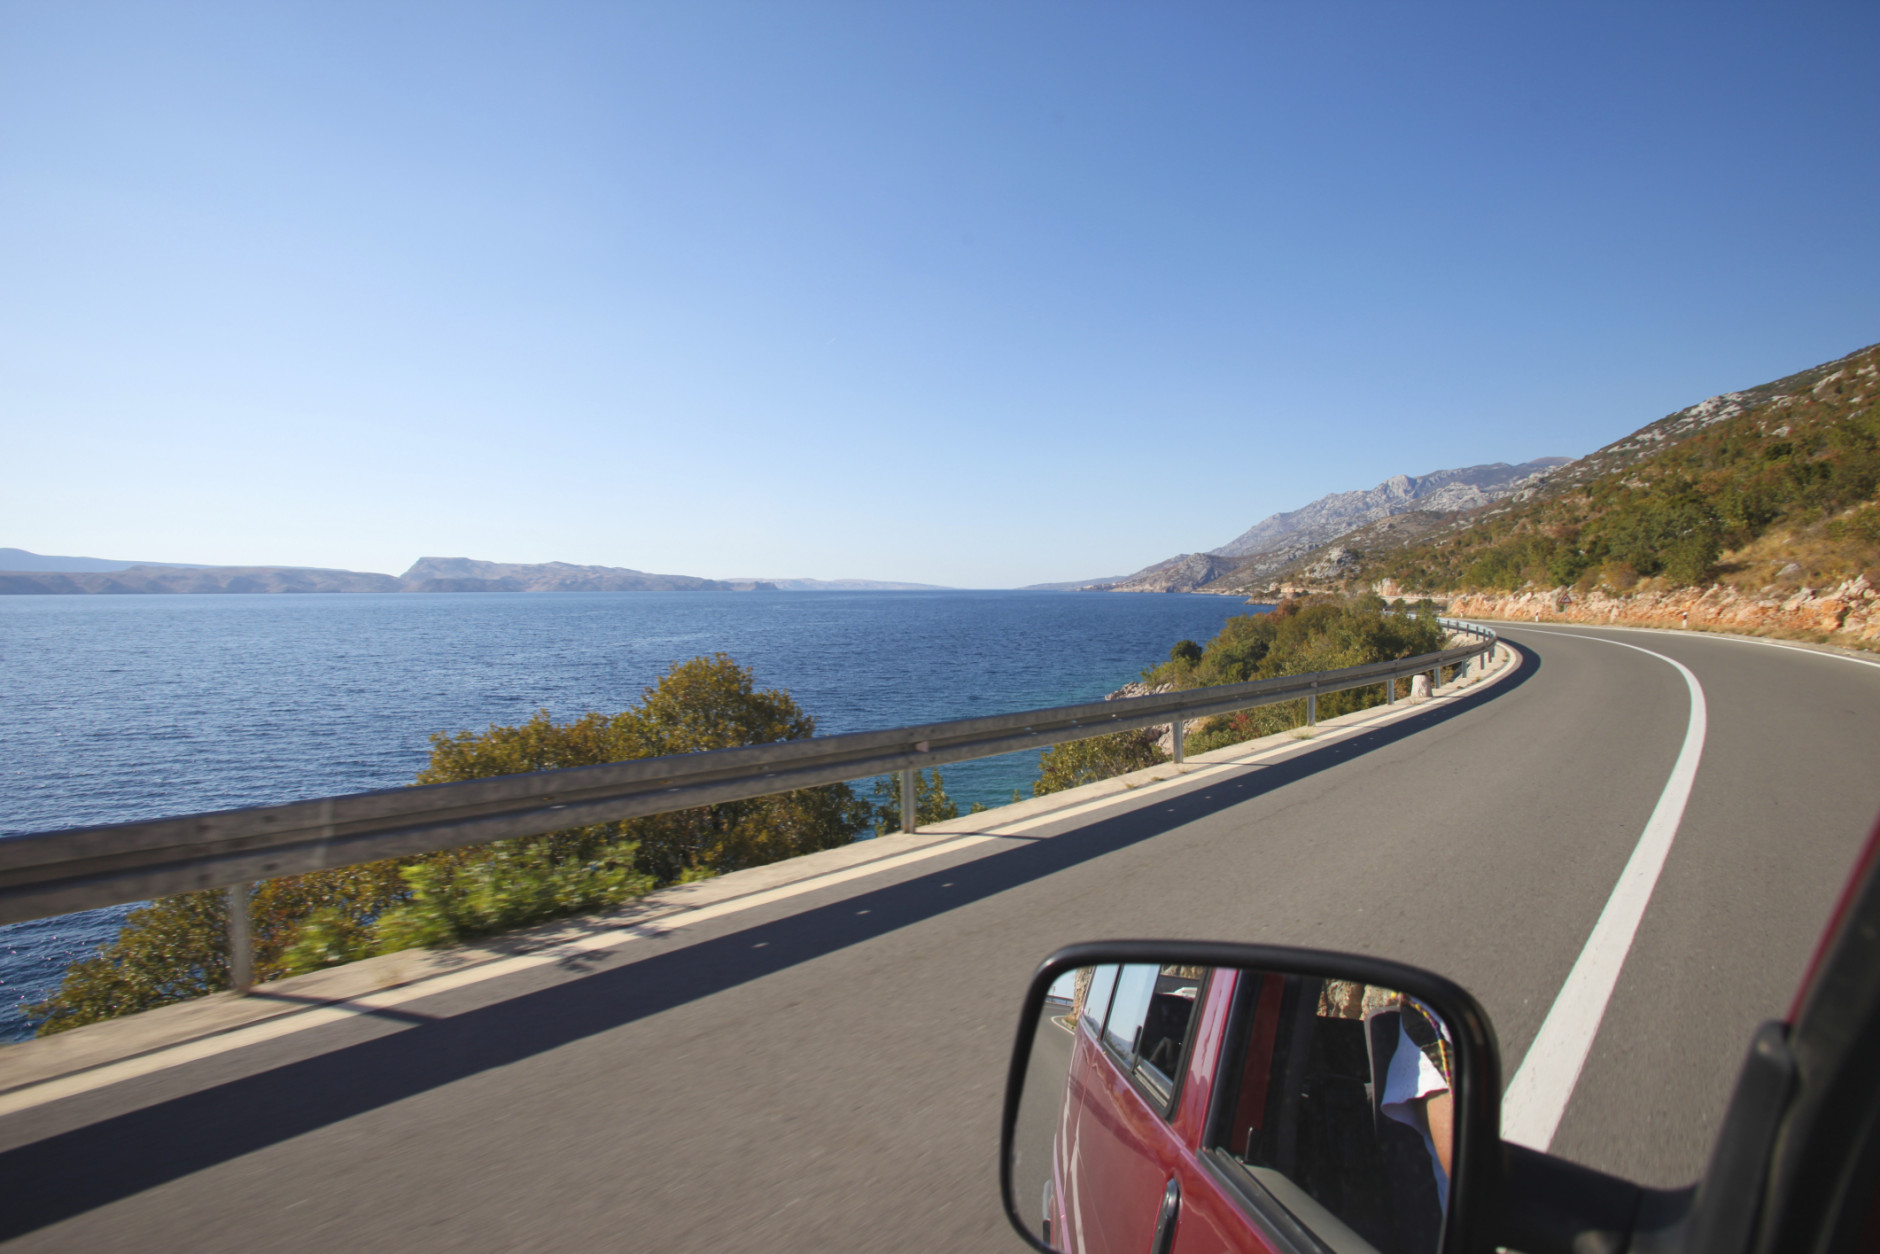 Don't head out on your late summer road trip before checking out these few tips. (Getty Images/iStockphoto/paulprescott72)